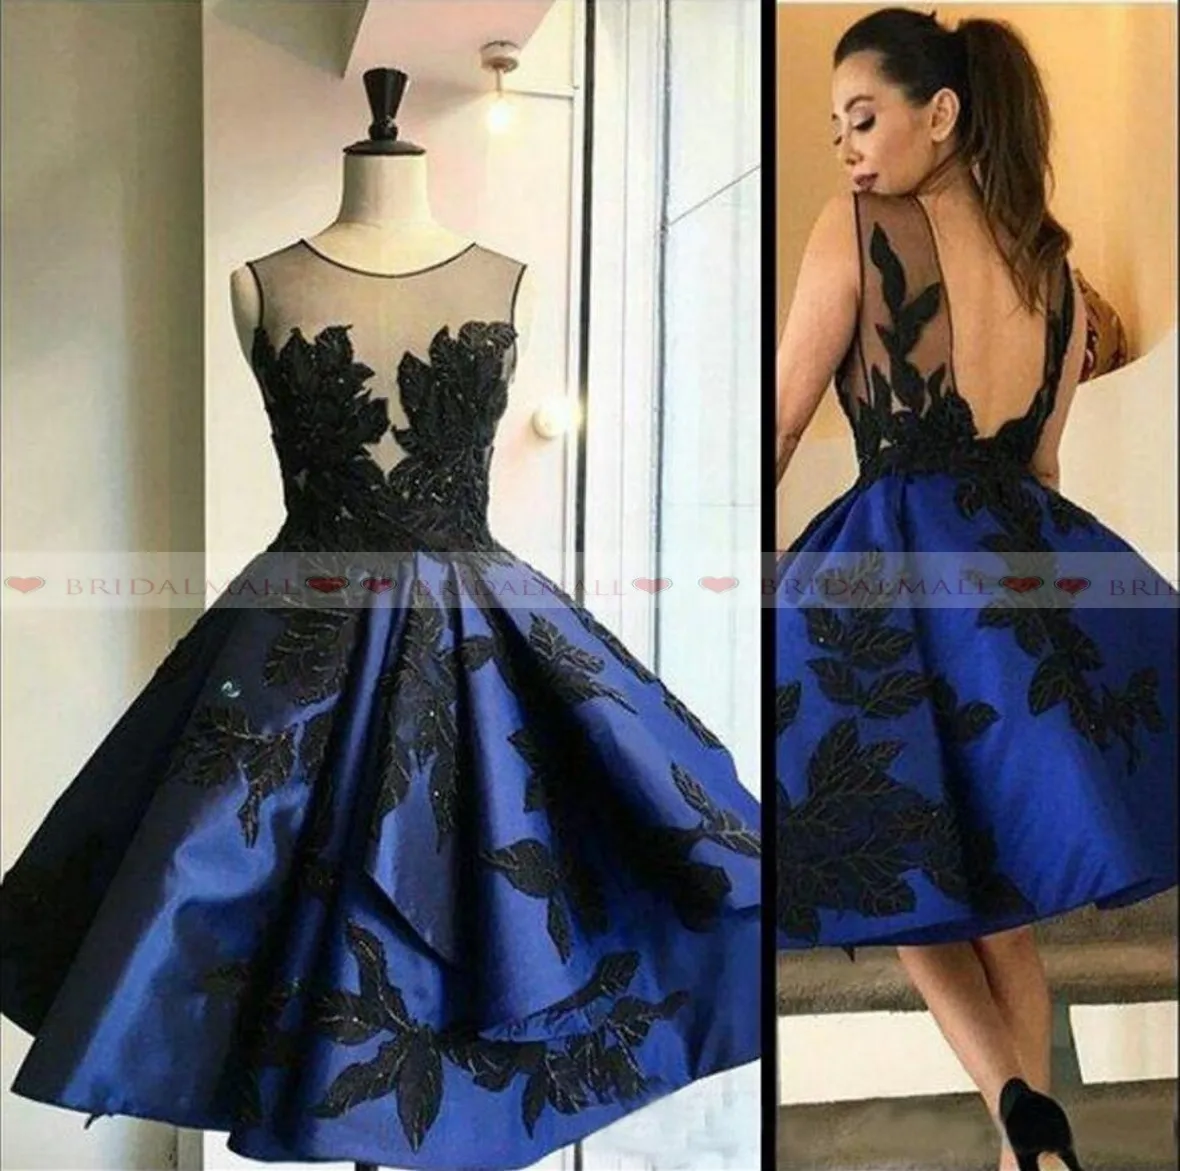 CHIC 2020 Royal Blue Short Homecoming Sukienki Sheer Neck Appliqued Satin Prom Dress 8th Gilrls Glade Sexy Backless Cocktail Party Suknie